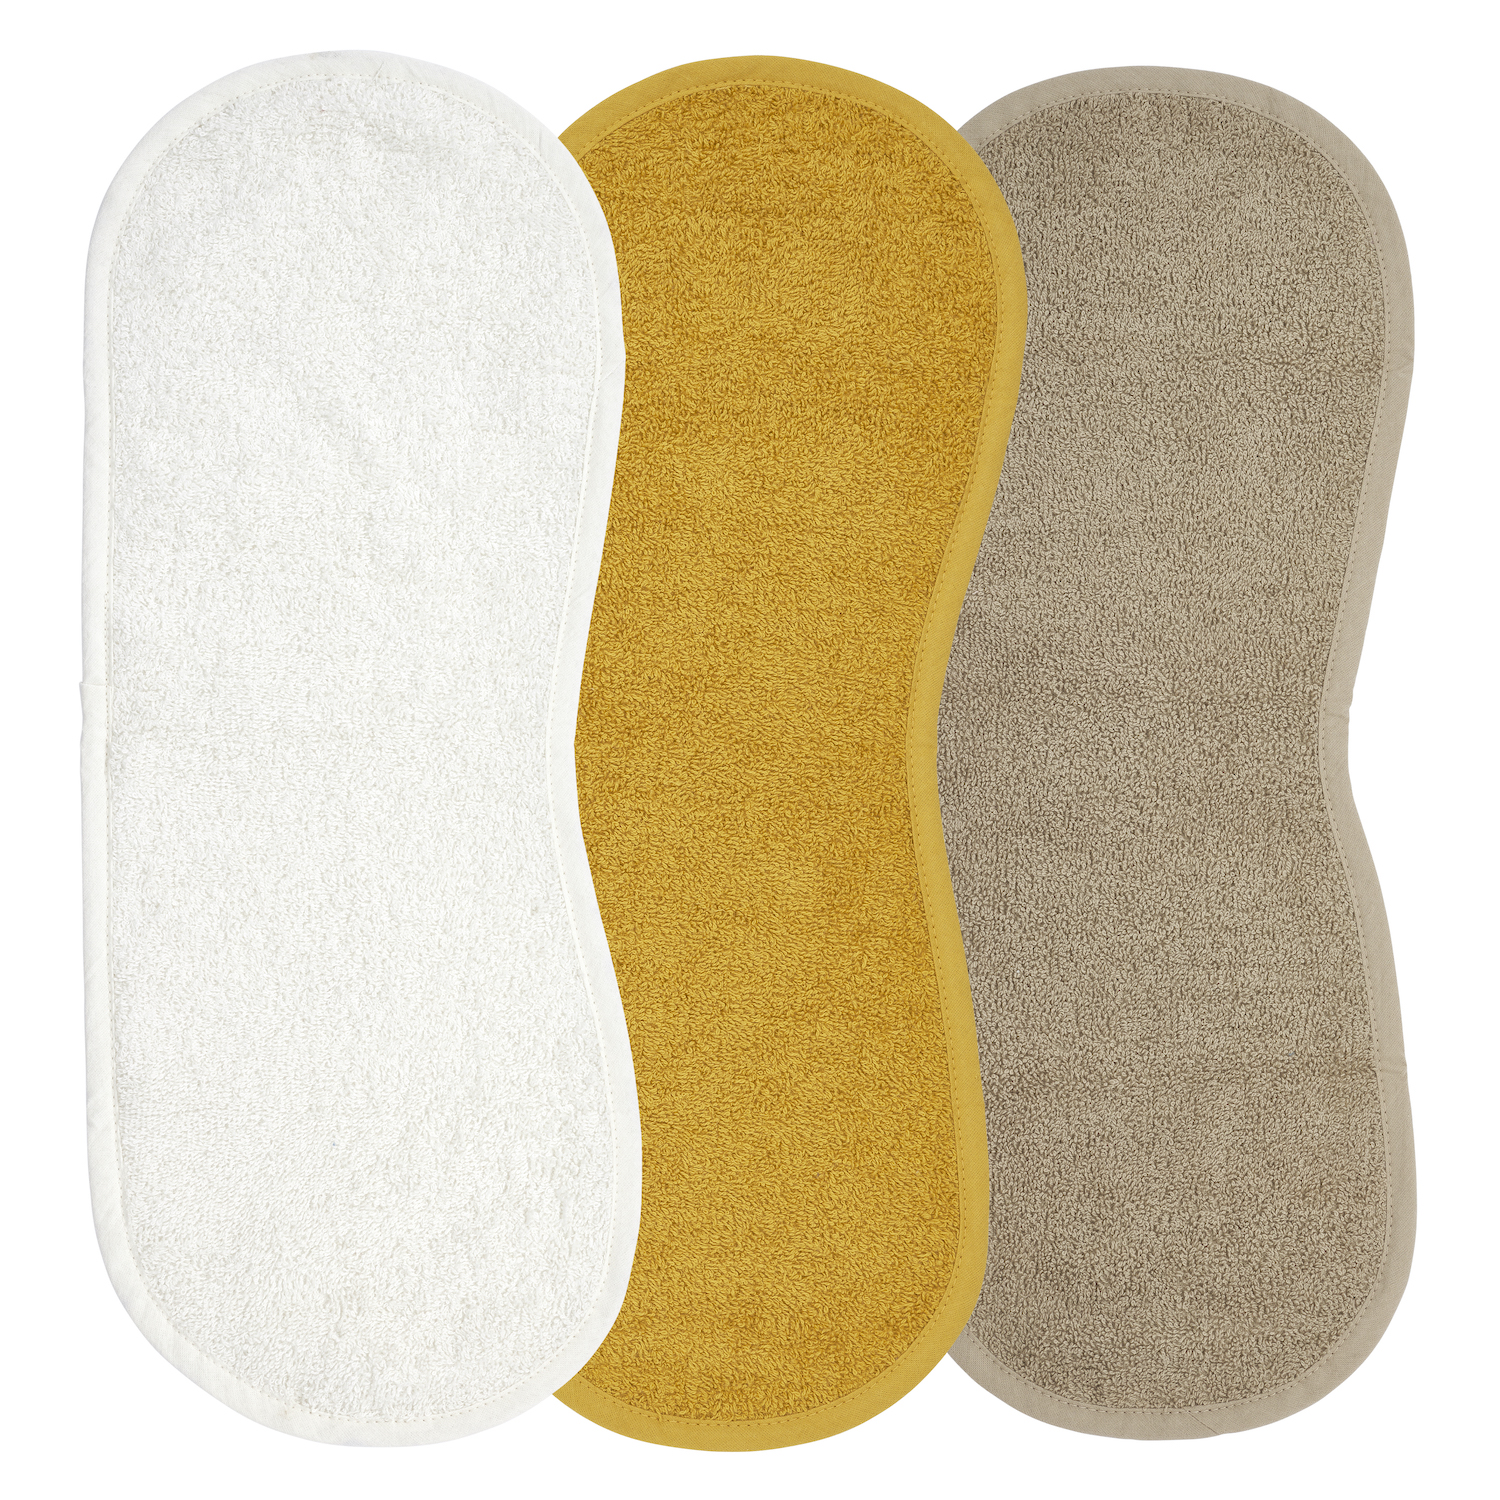 Spucktuch 3er pack frottee Uni - offwhite/honey gold/taupe - 53x20cm